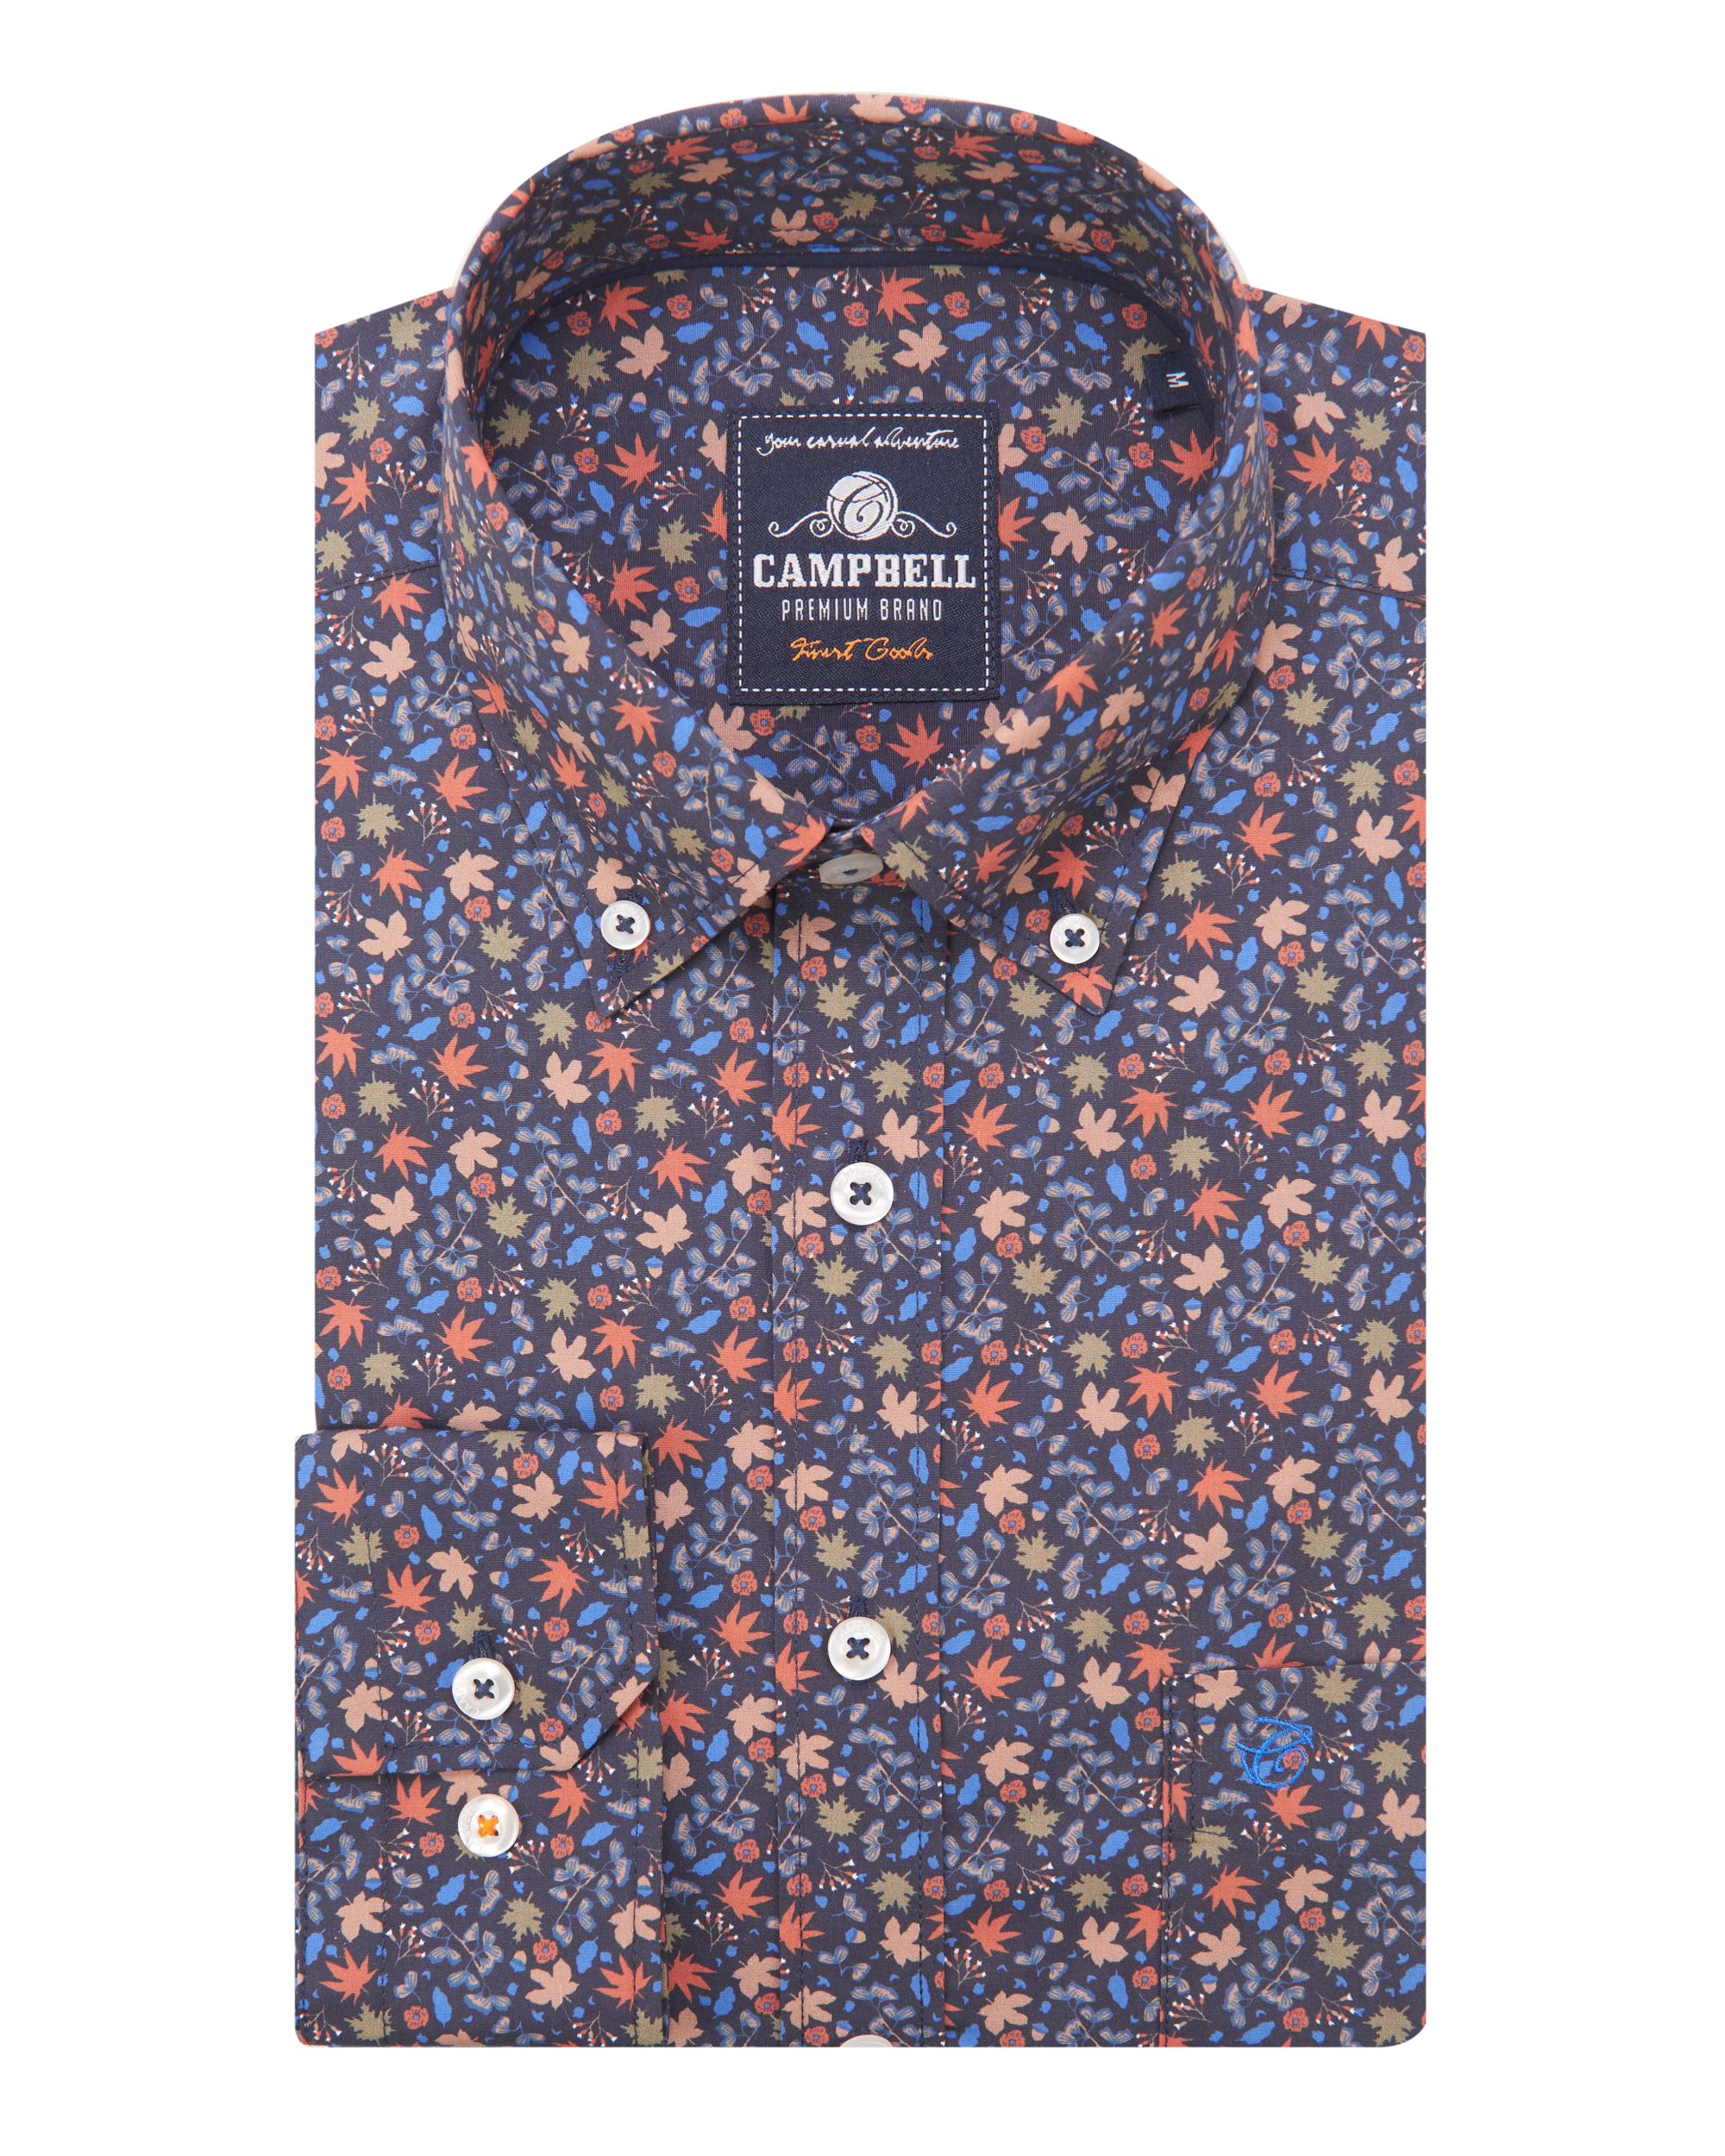 Campbell Classic Casual Overhemd LM Oranje dessin 084661-001-L